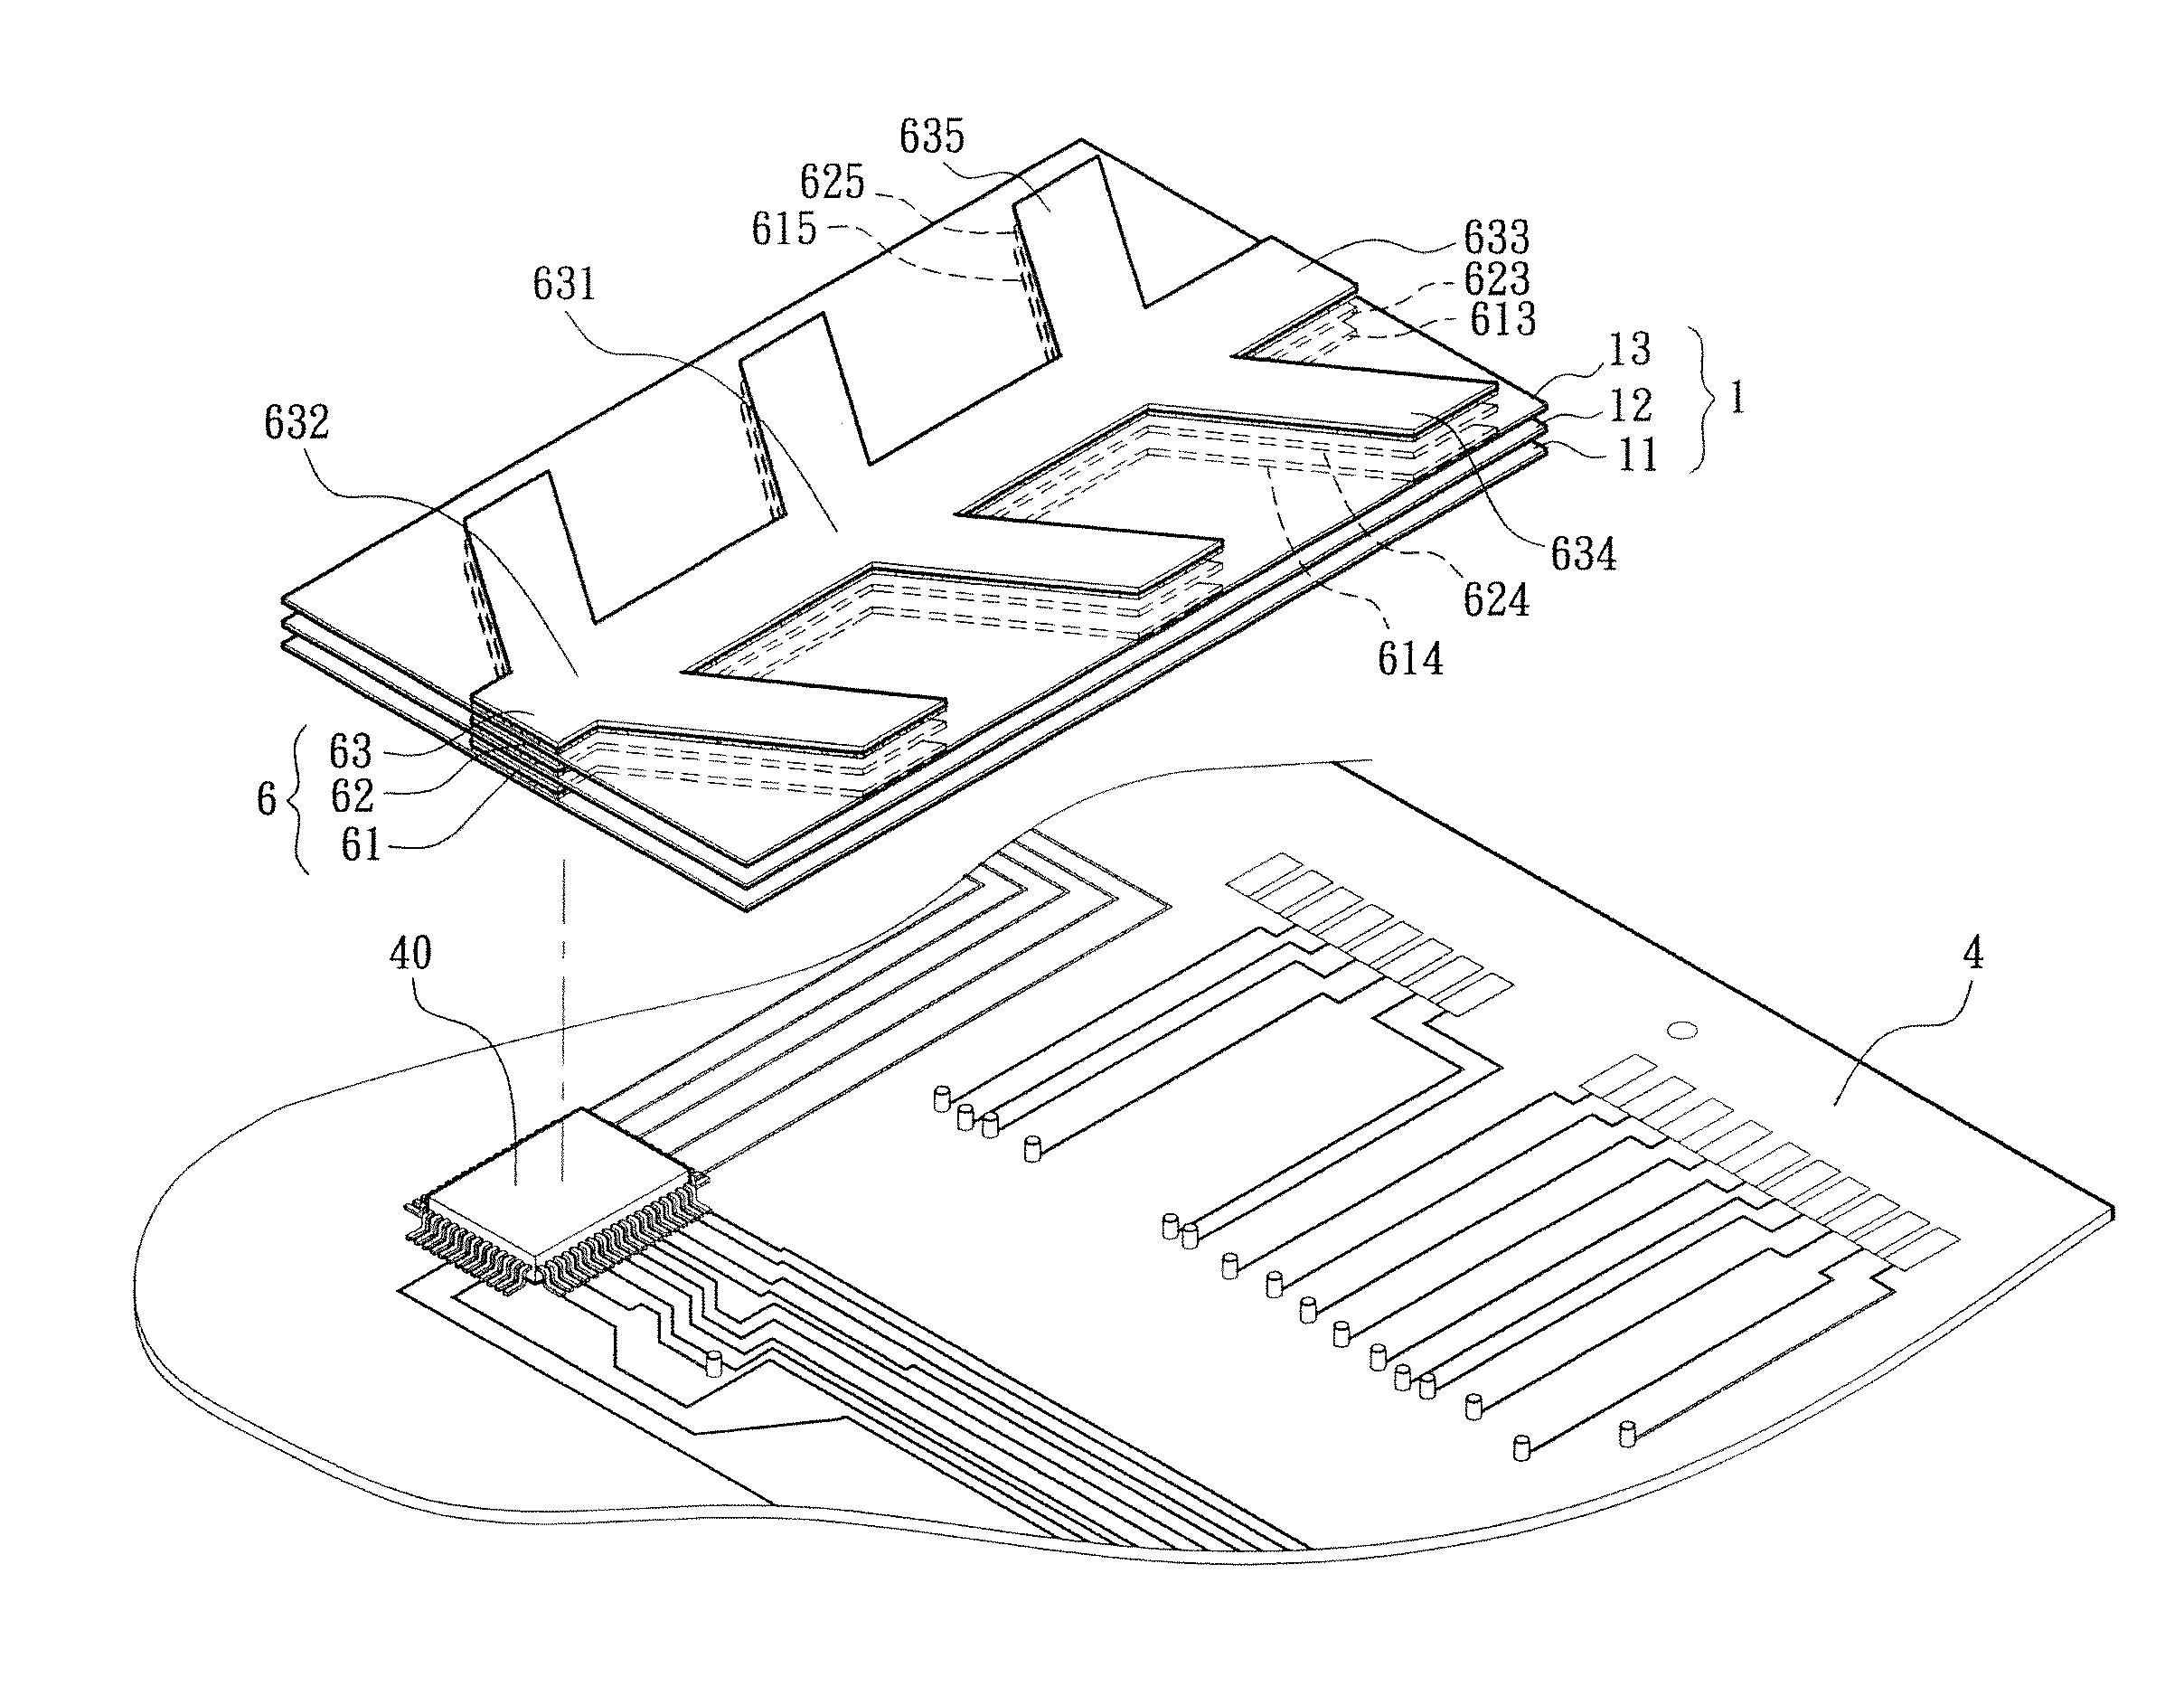 Complex heat dissipation assembly